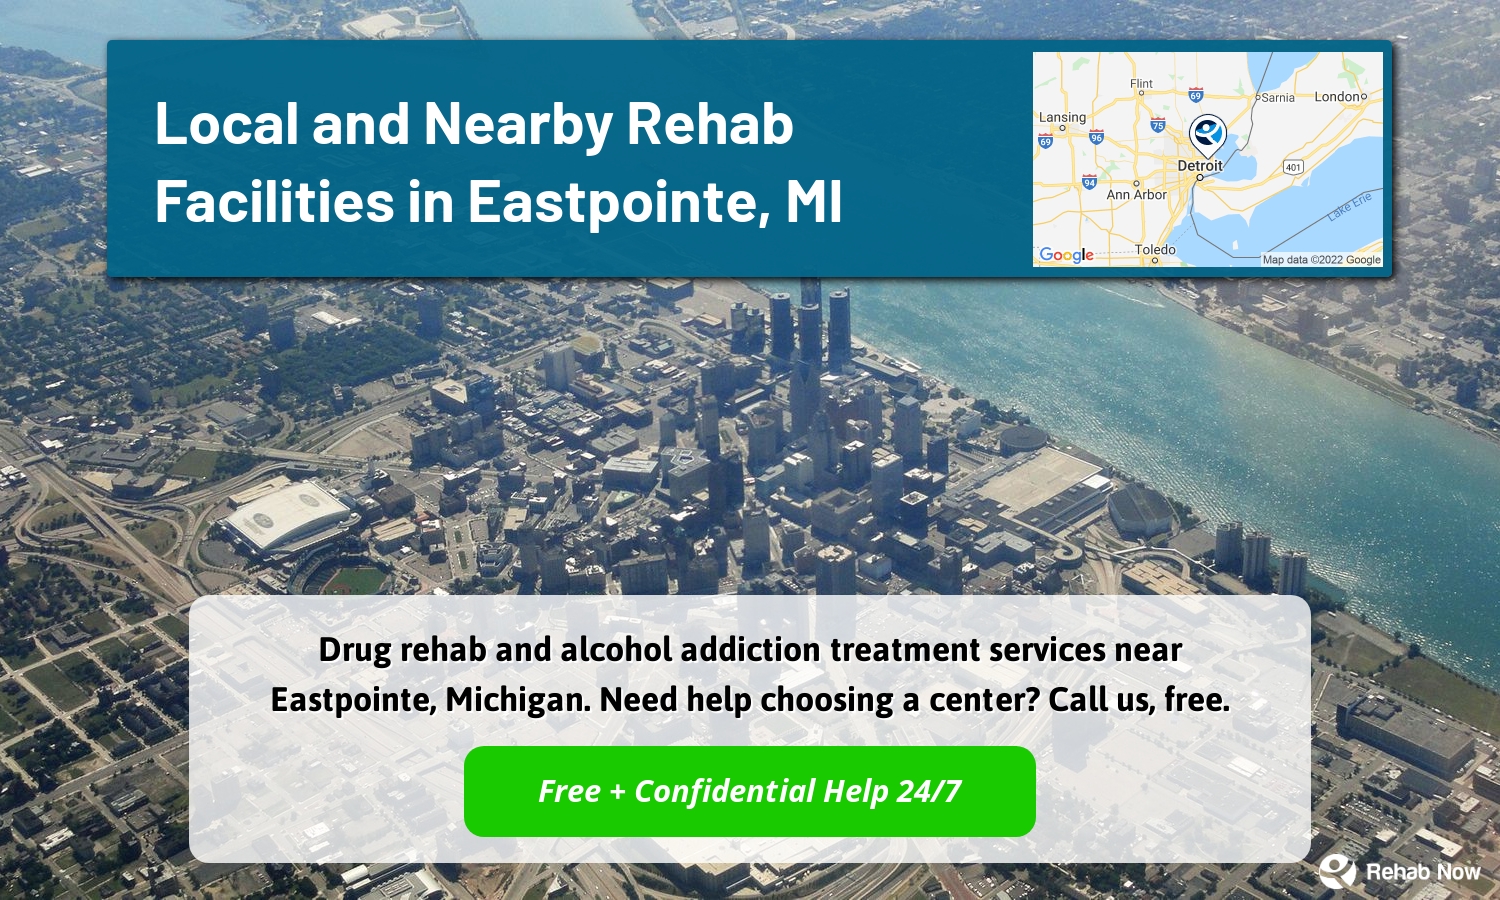 Drug rehab and alcohol addiction treatment services near Eastpointe, Michigan. Need help choosing a center? Call us, free.